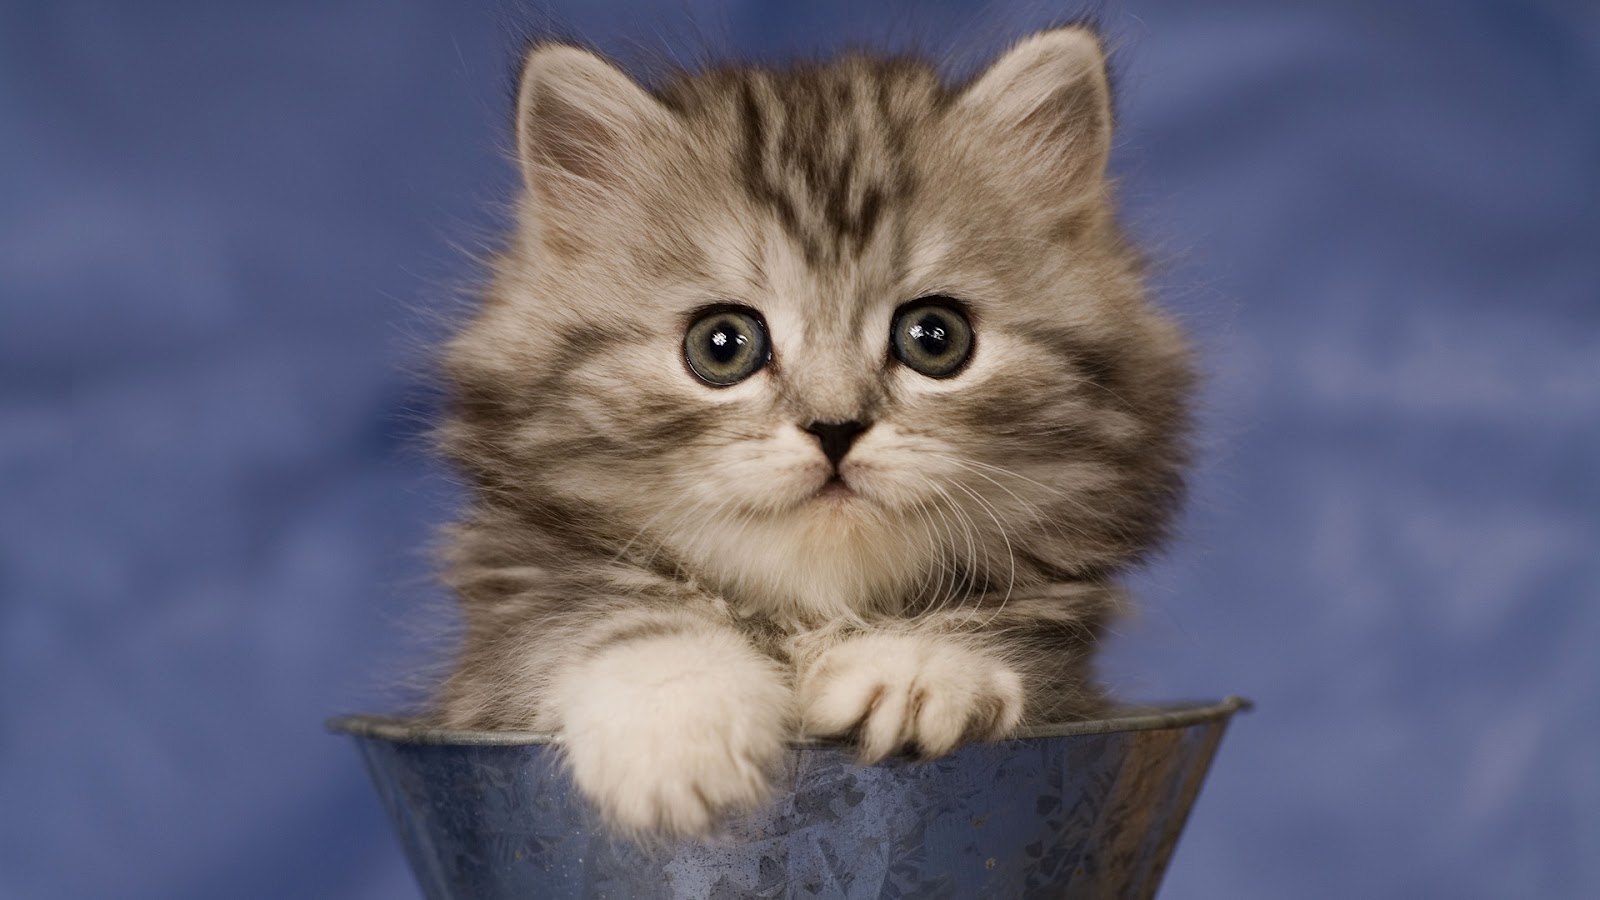 World's Cutest Cat Breeds - Did Your Cat Make the List?